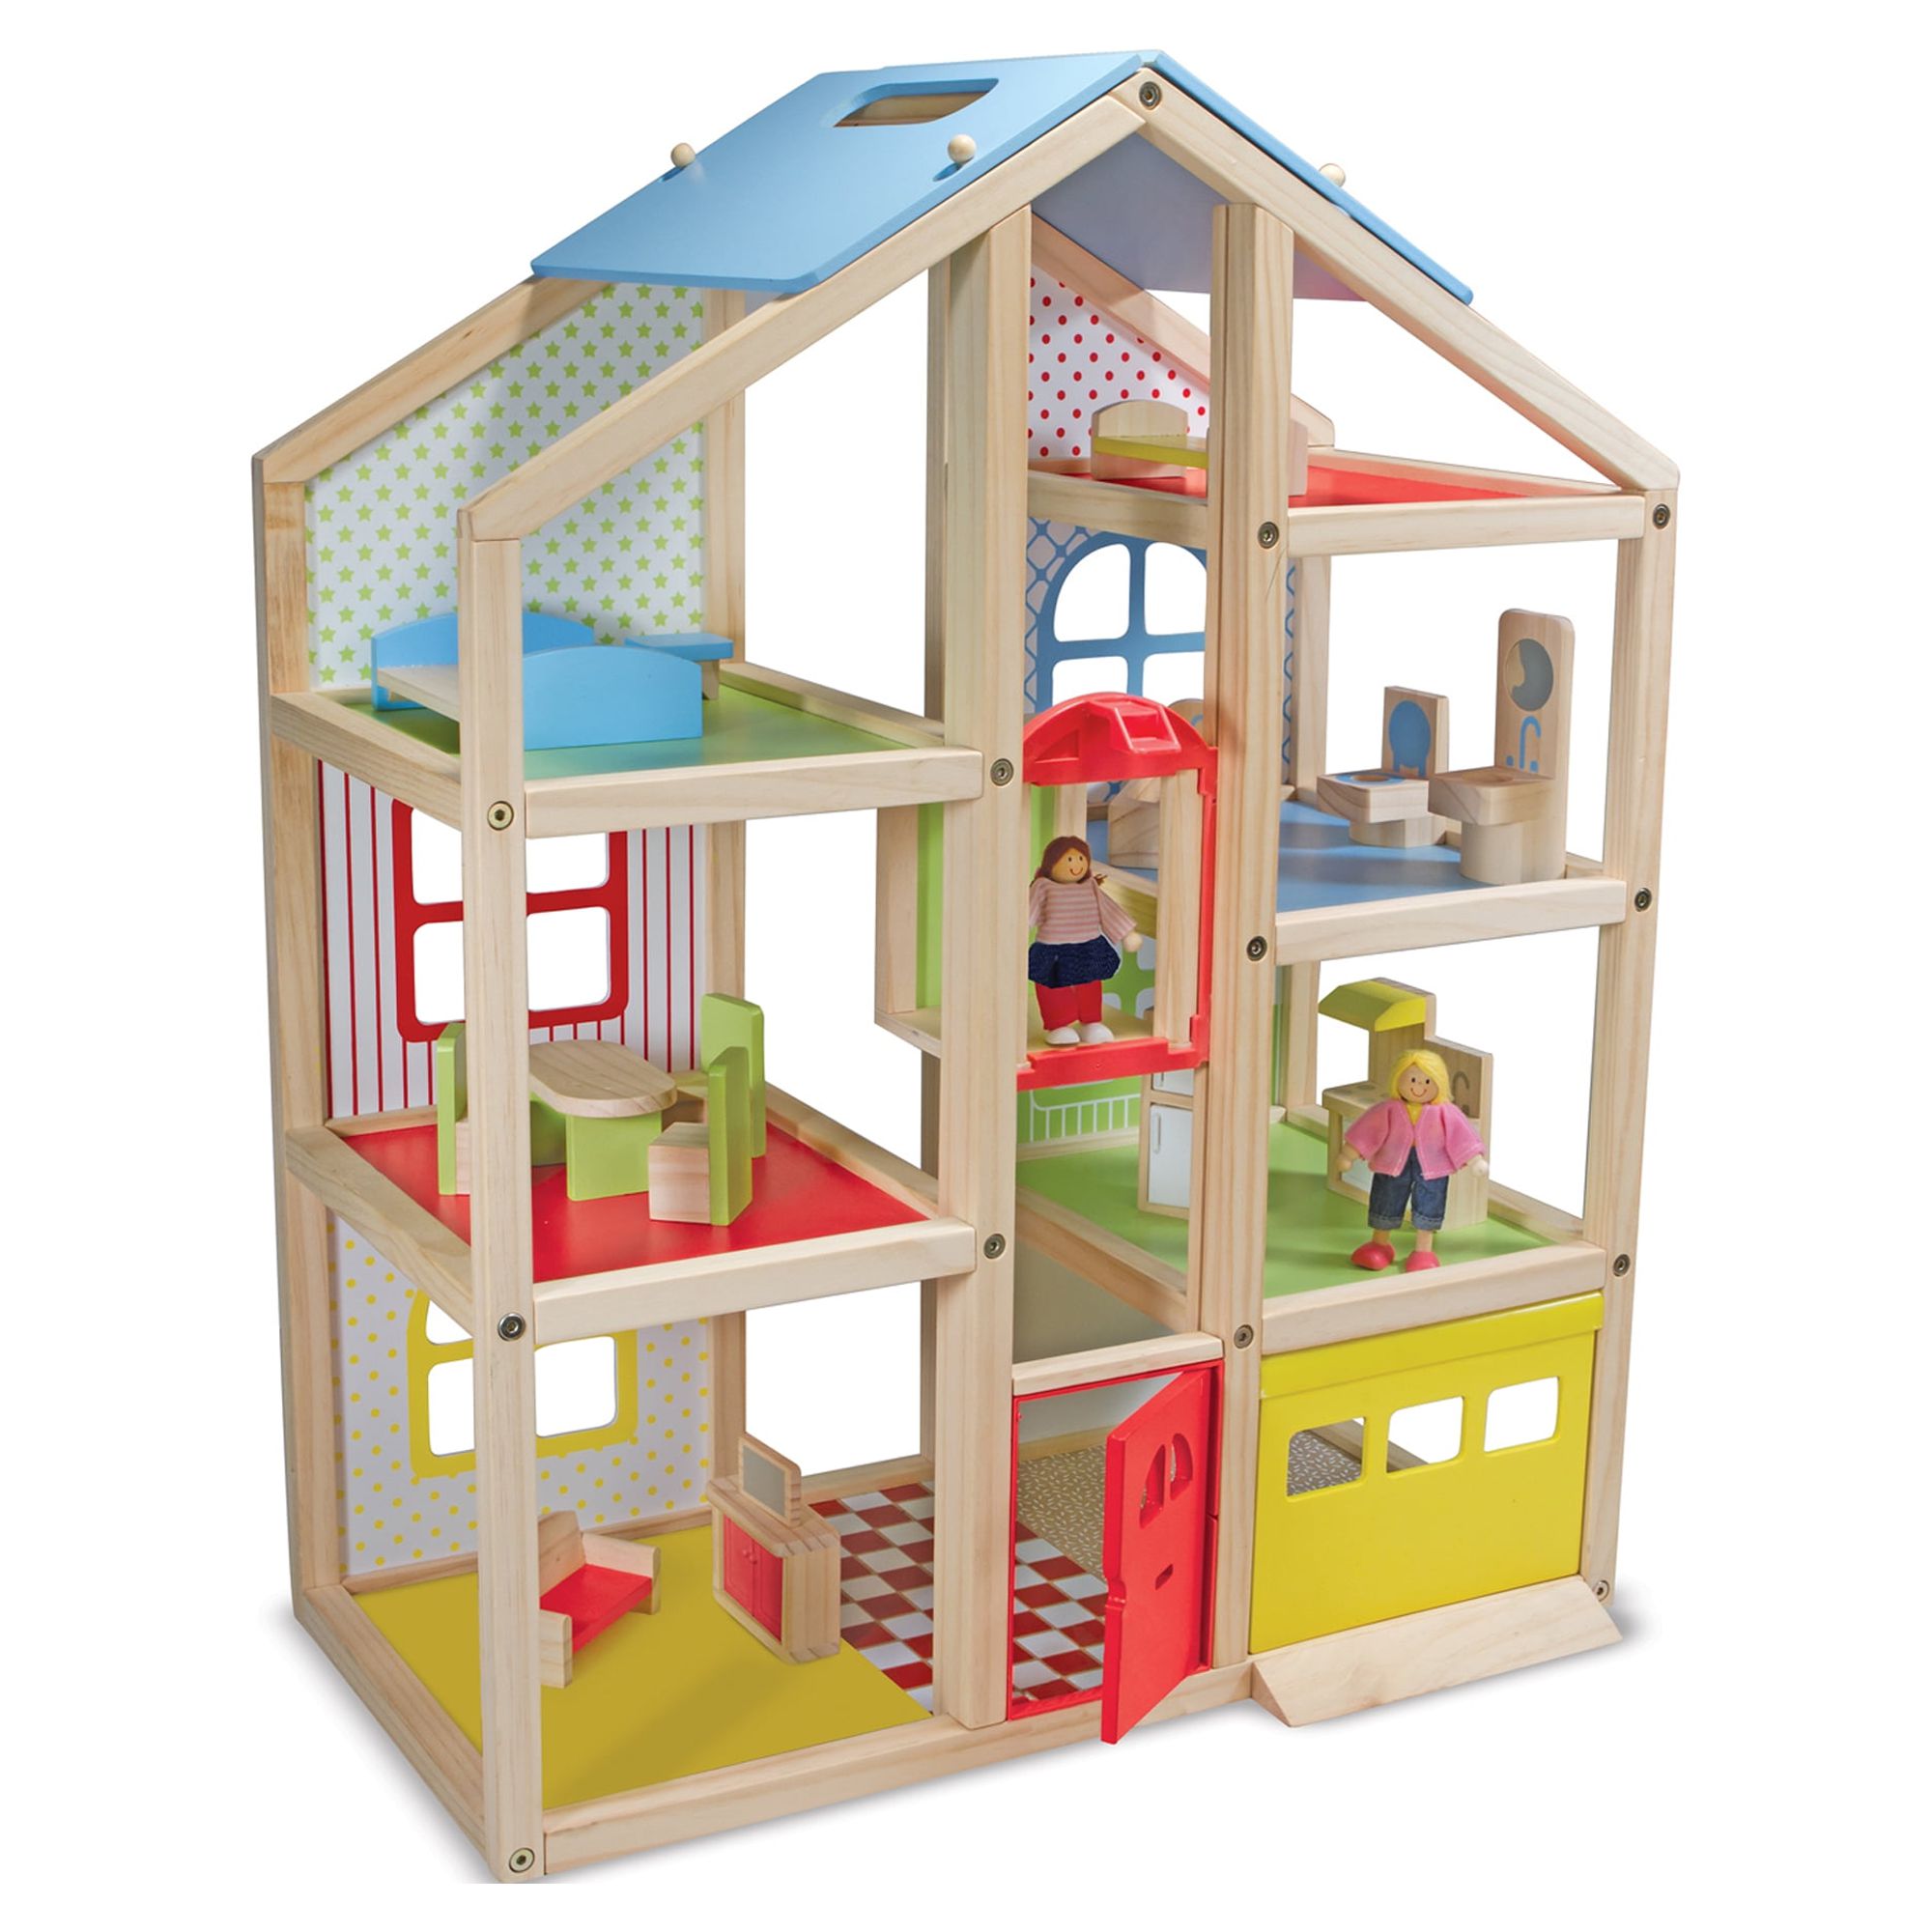 Melissa & Doug Wooden Hi-Rise Dollhouse With 15 Furniture Pieces, Garage, Working Elevator - image 1 of 10